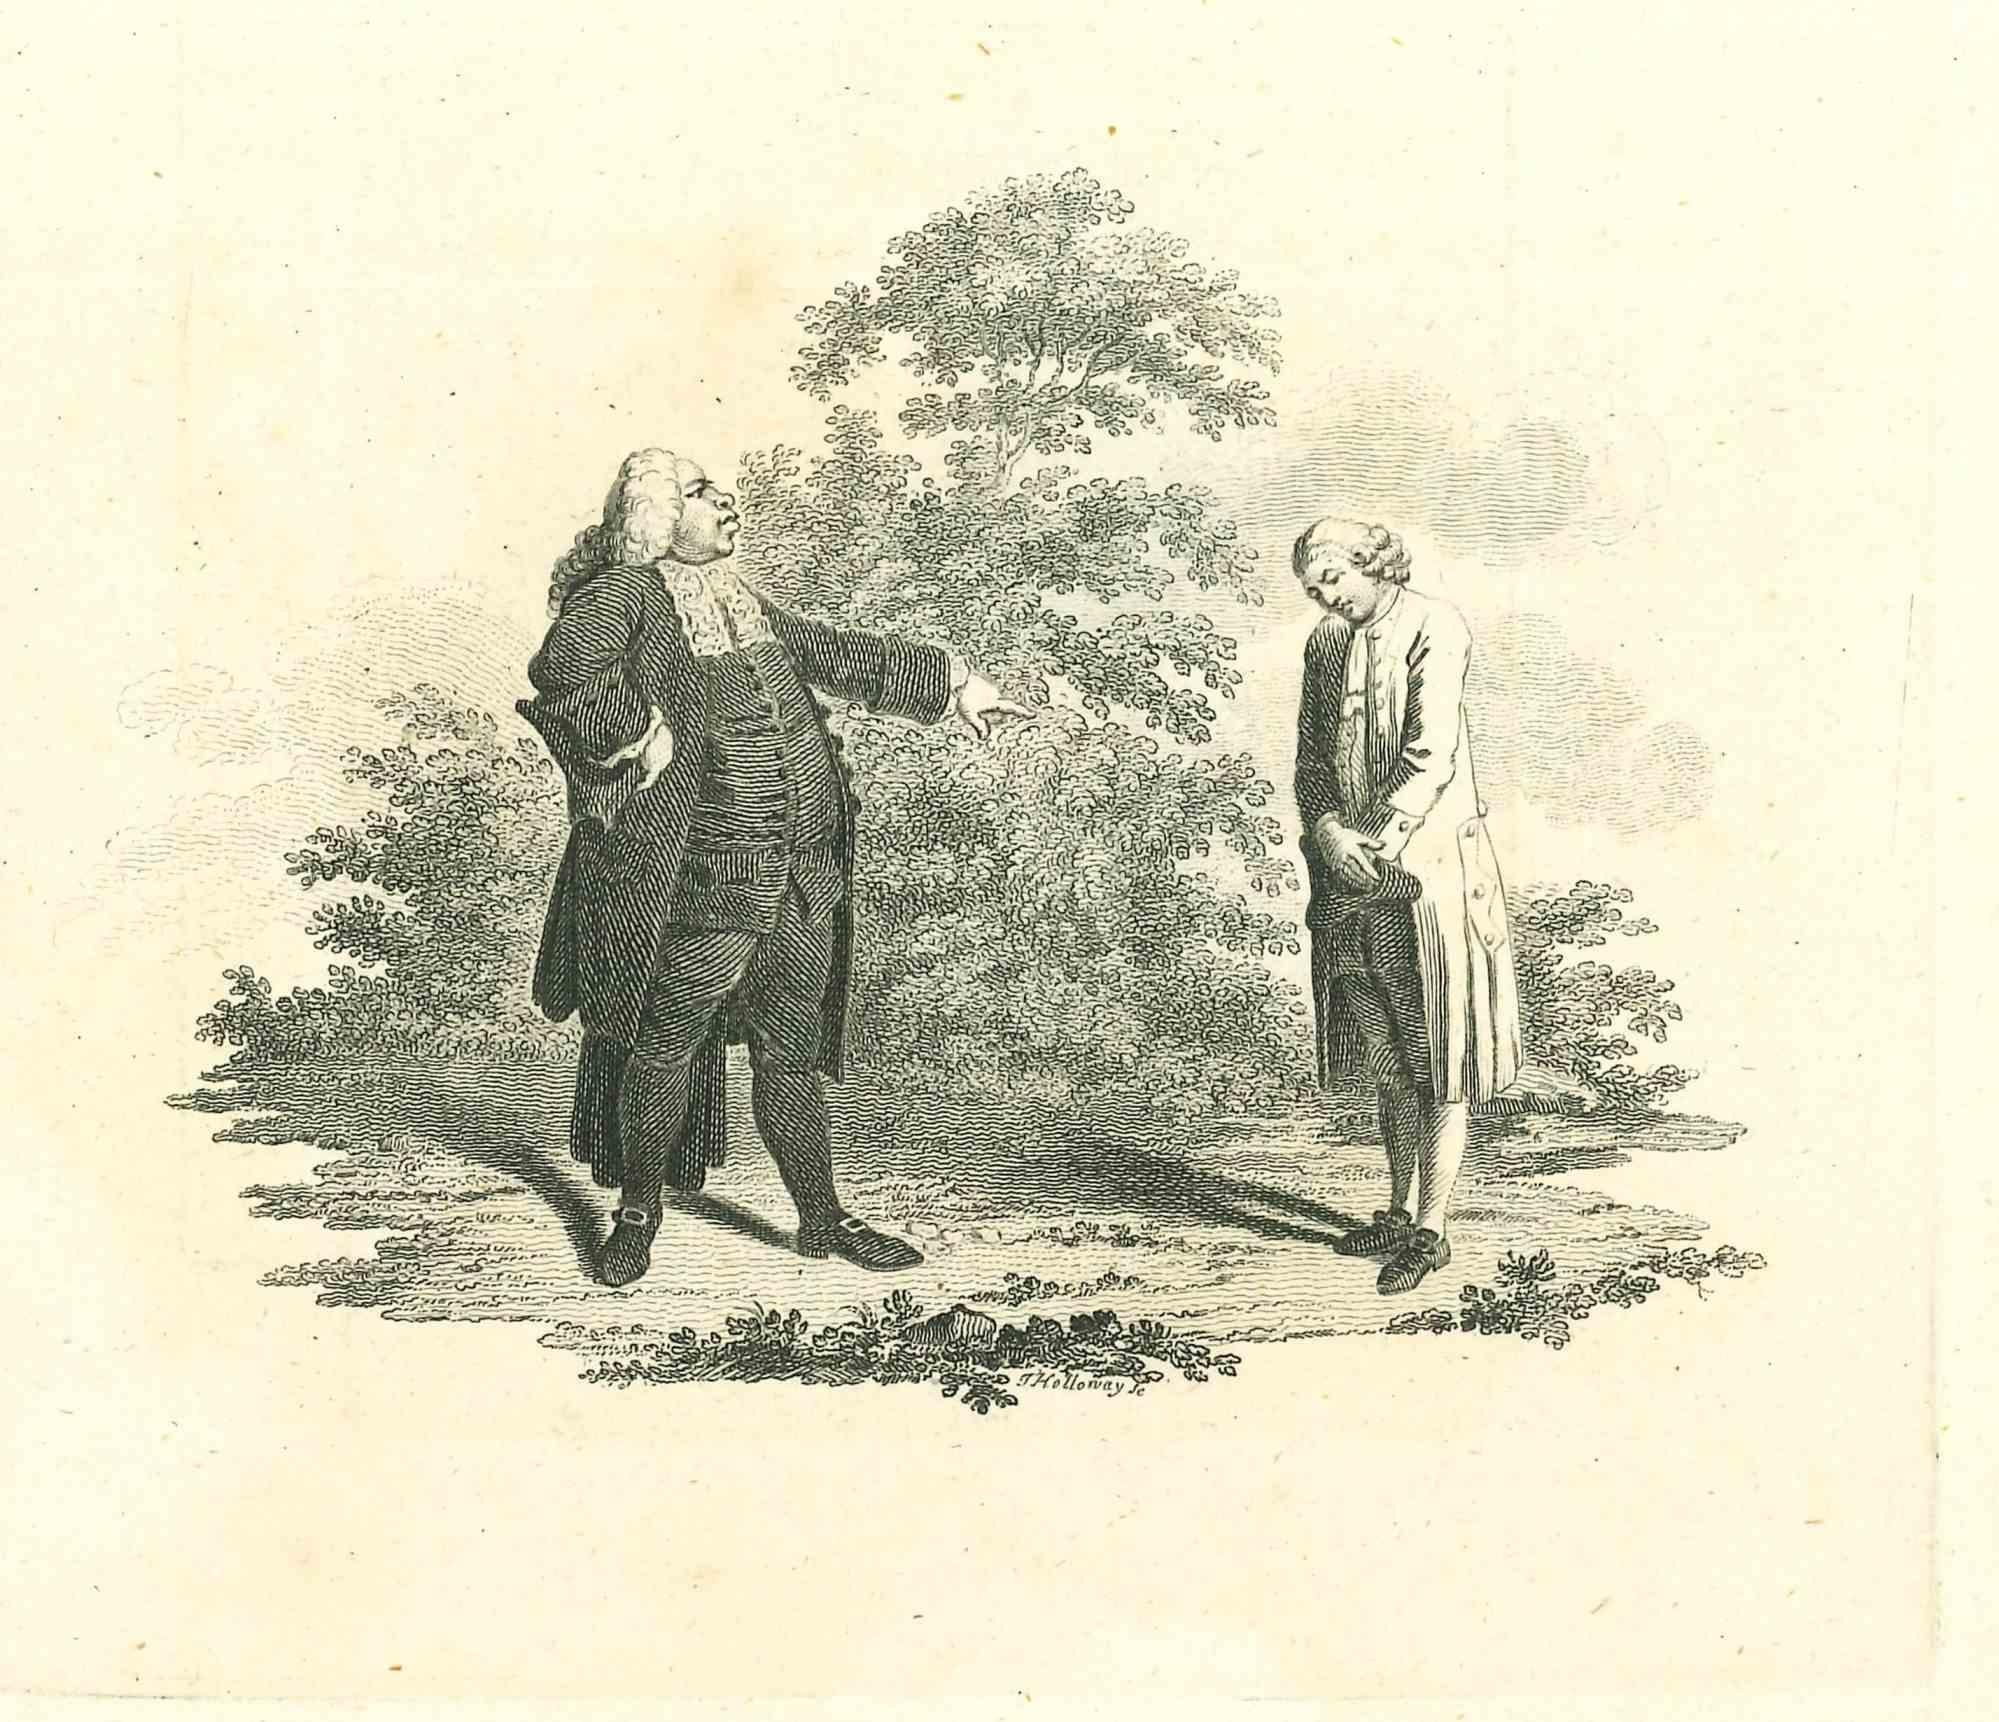 Historical scene is an artwork realized by Thomas Holloway for Johann Caspar Lavater's  "Essays on Physiognomy, Designed to promote the Knowledge and the Love of Mankind", London, Bensley, 1810.

This artwork portrays a historical scene. On the back